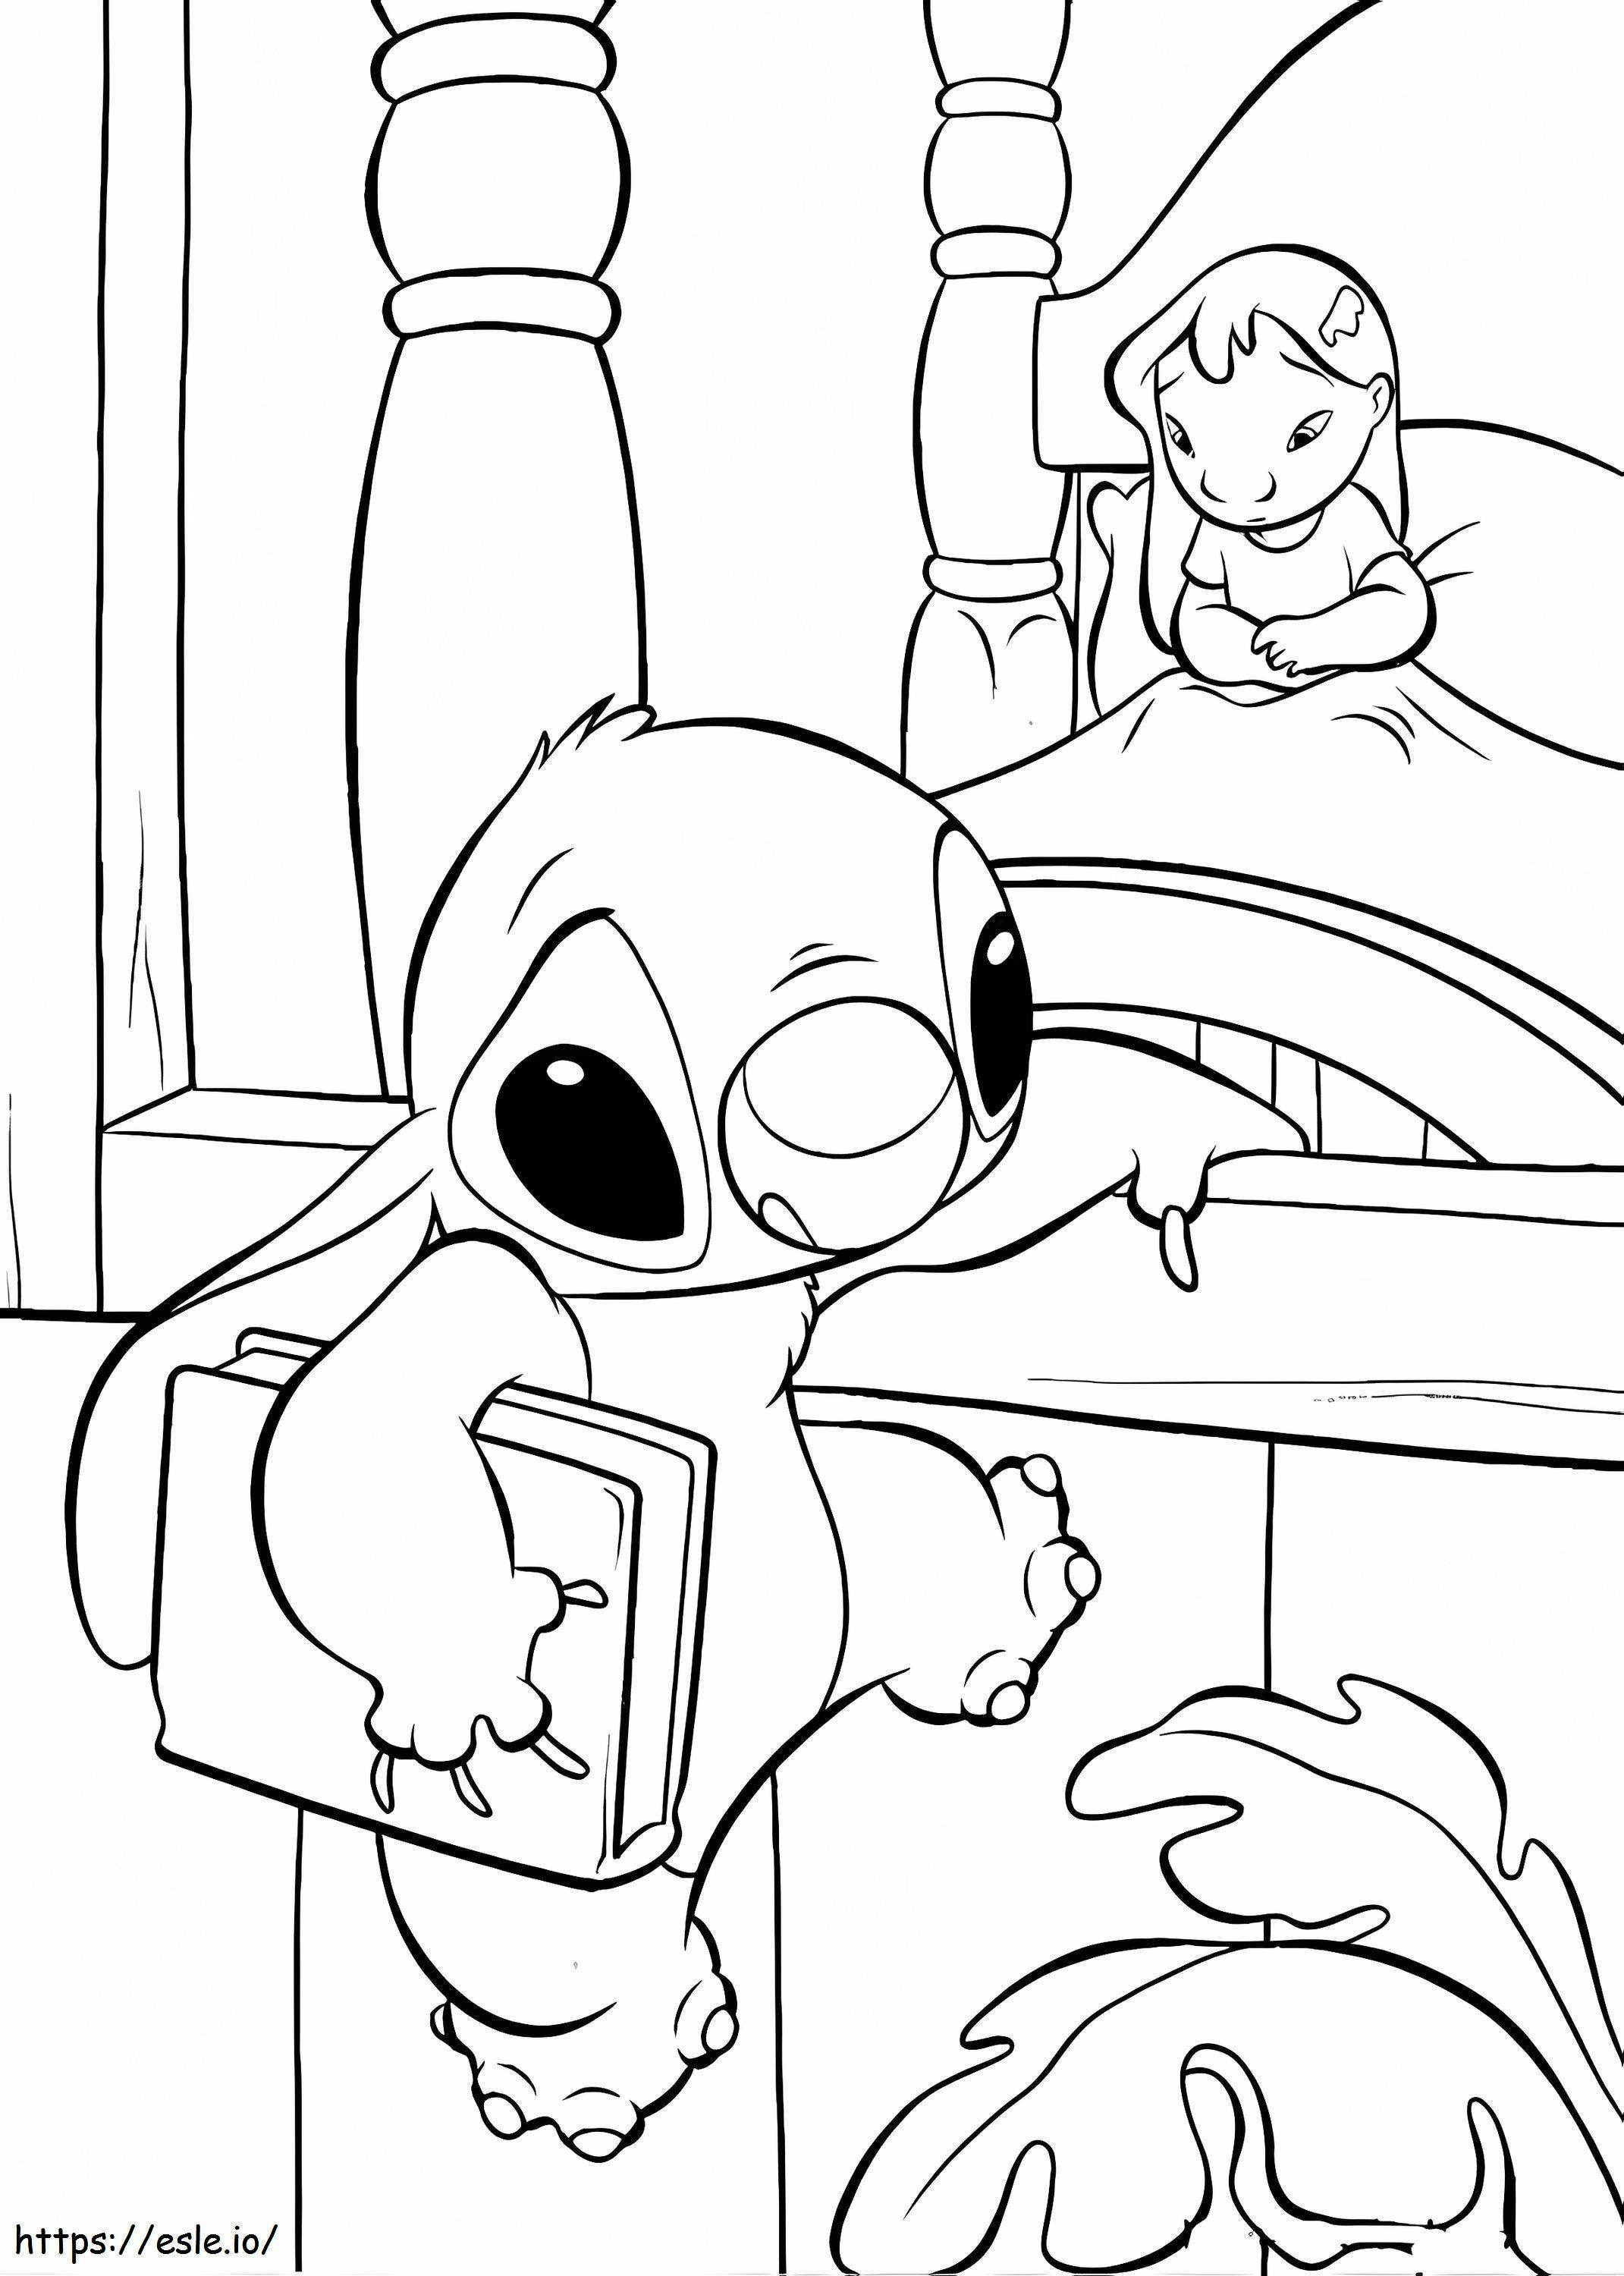 Stitch 3 coloring page